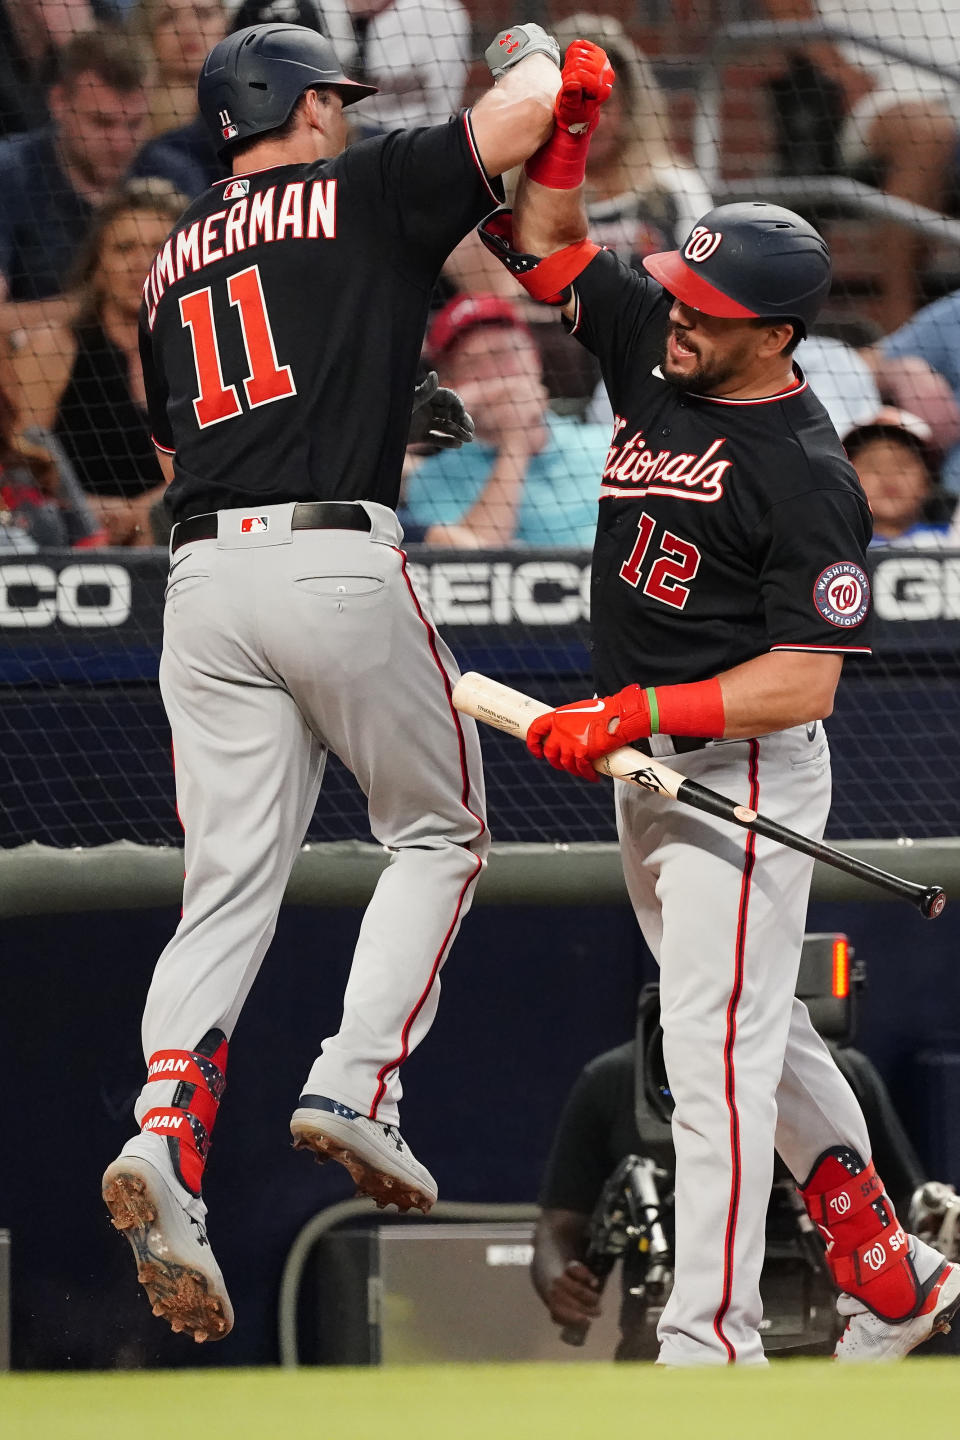 Washington Nationals' Ryan Zimmerman (11) celebrates with Kyle Schwarber (12) after hitting a two-run home run in the fourth inning of a baseball game against the Atlanta Braves Tuesday, June 1, 2021, in Atlanta. (AP Photo/John Bazemore)